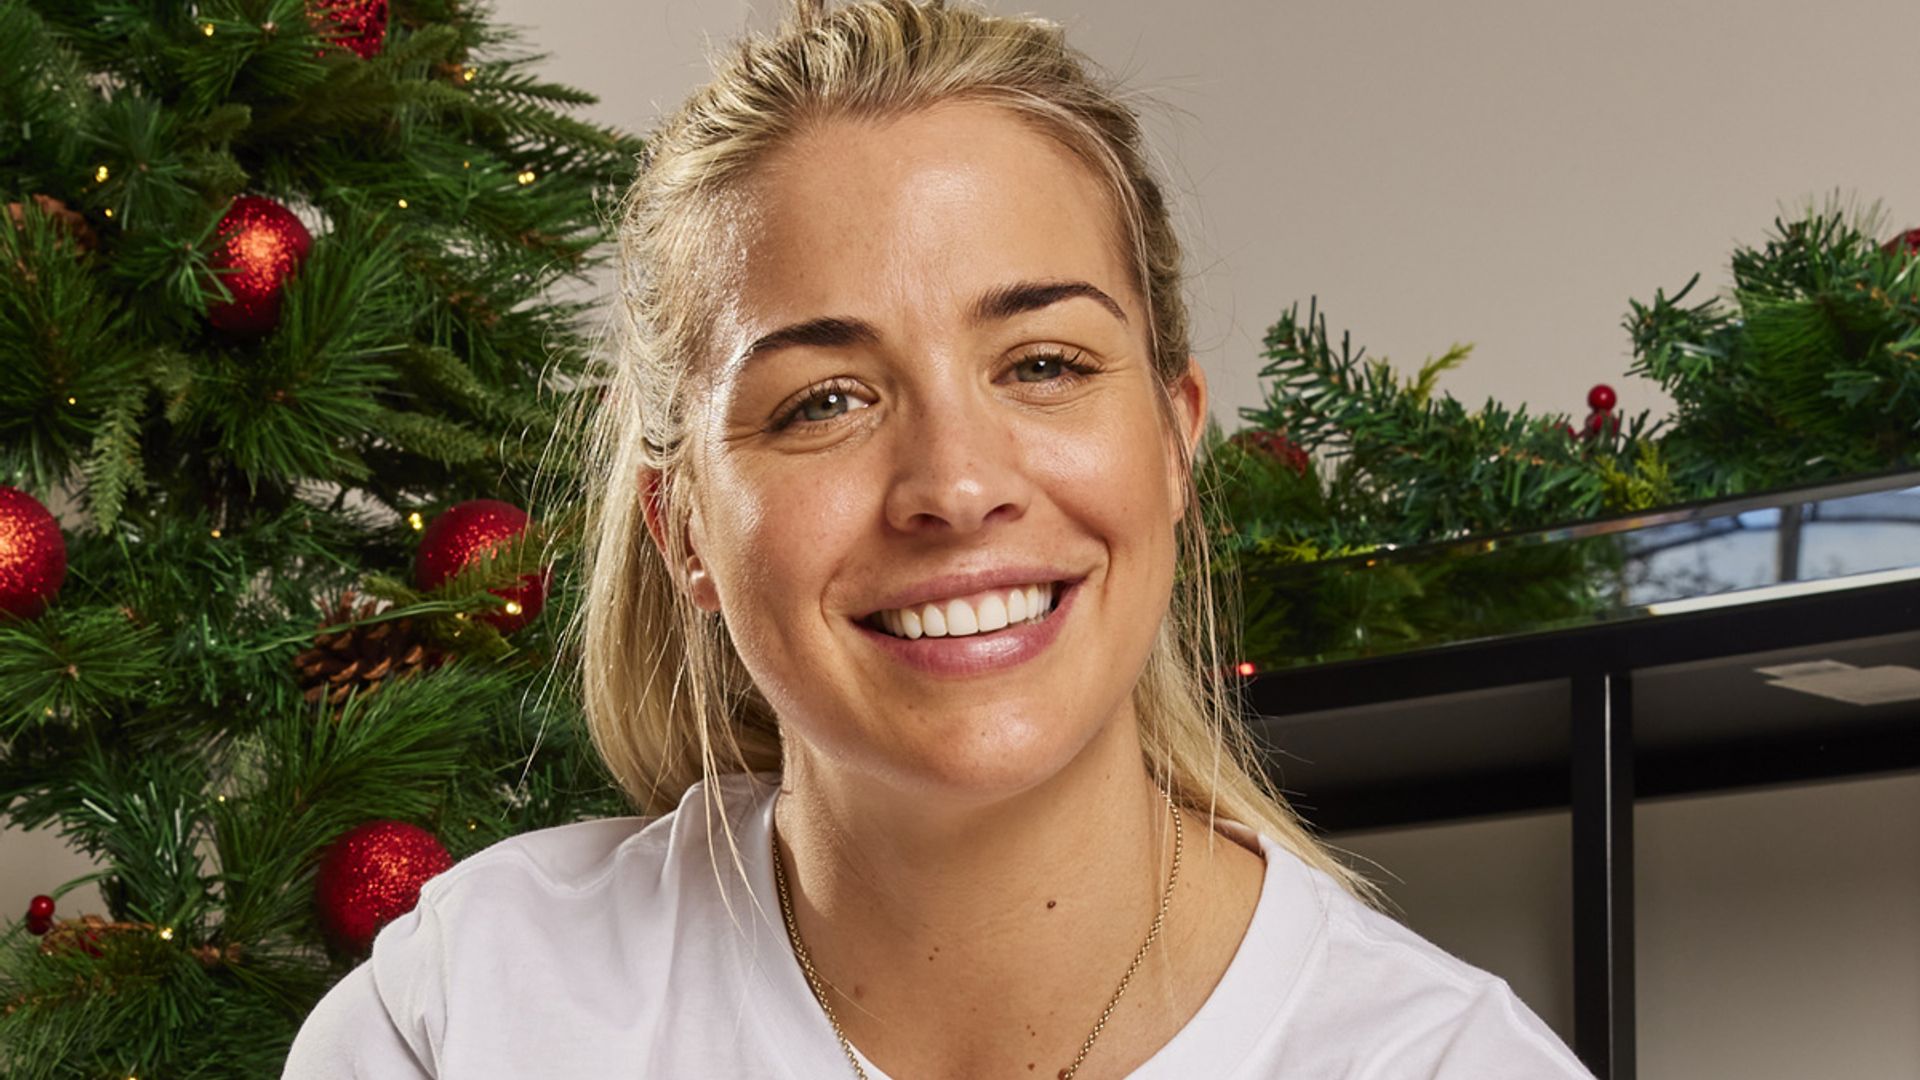 Gemma Atkinson confuses fans with physical transformation in new workout photos